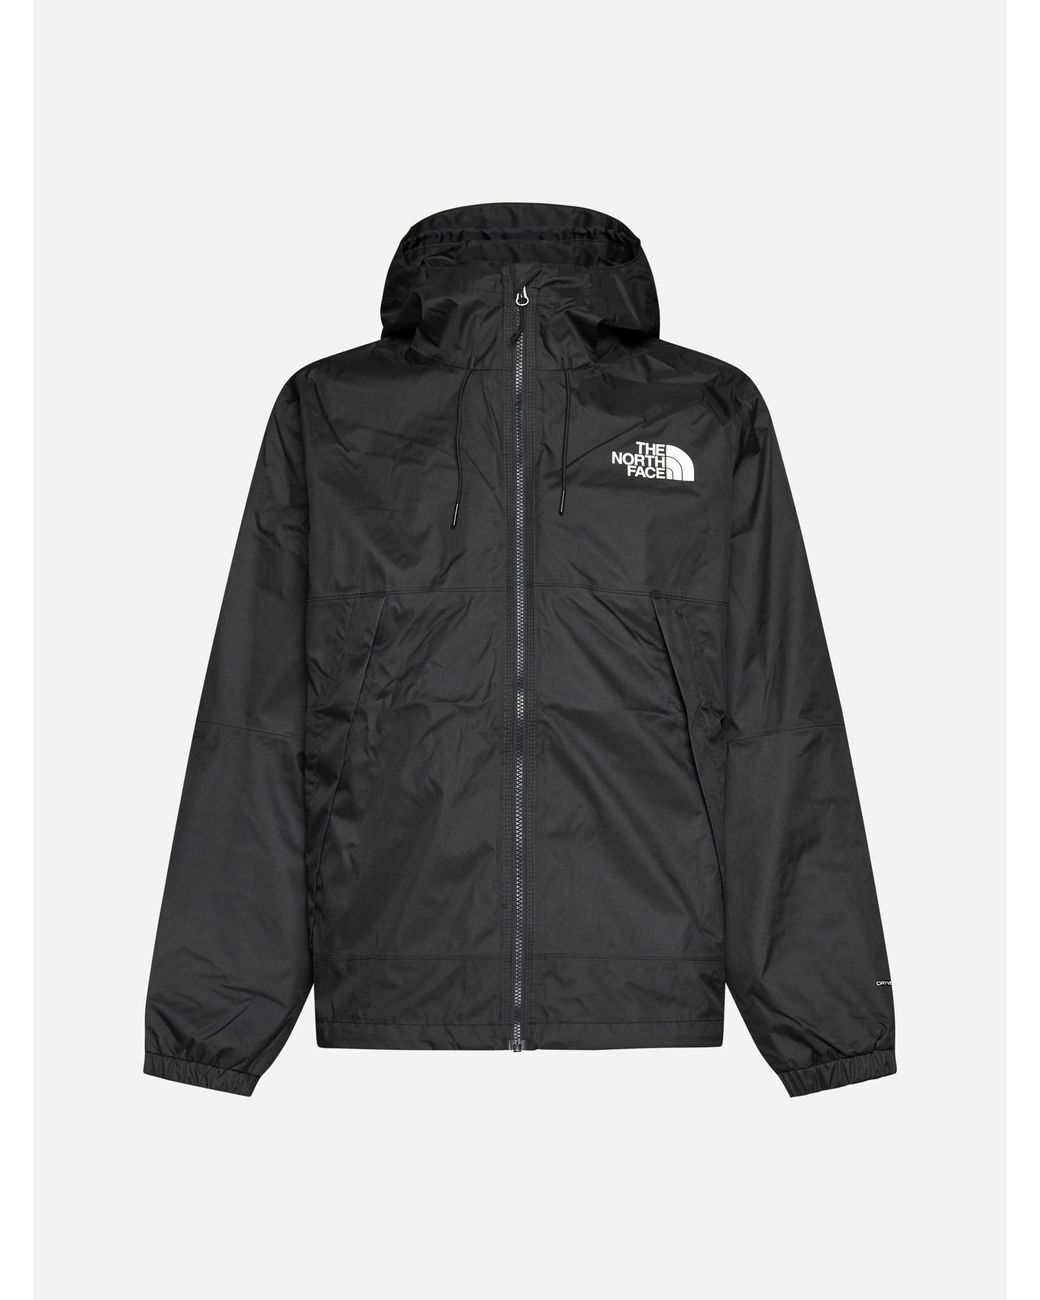 The North Face Mountain Nylon Jacket in Black for Men | Lyst